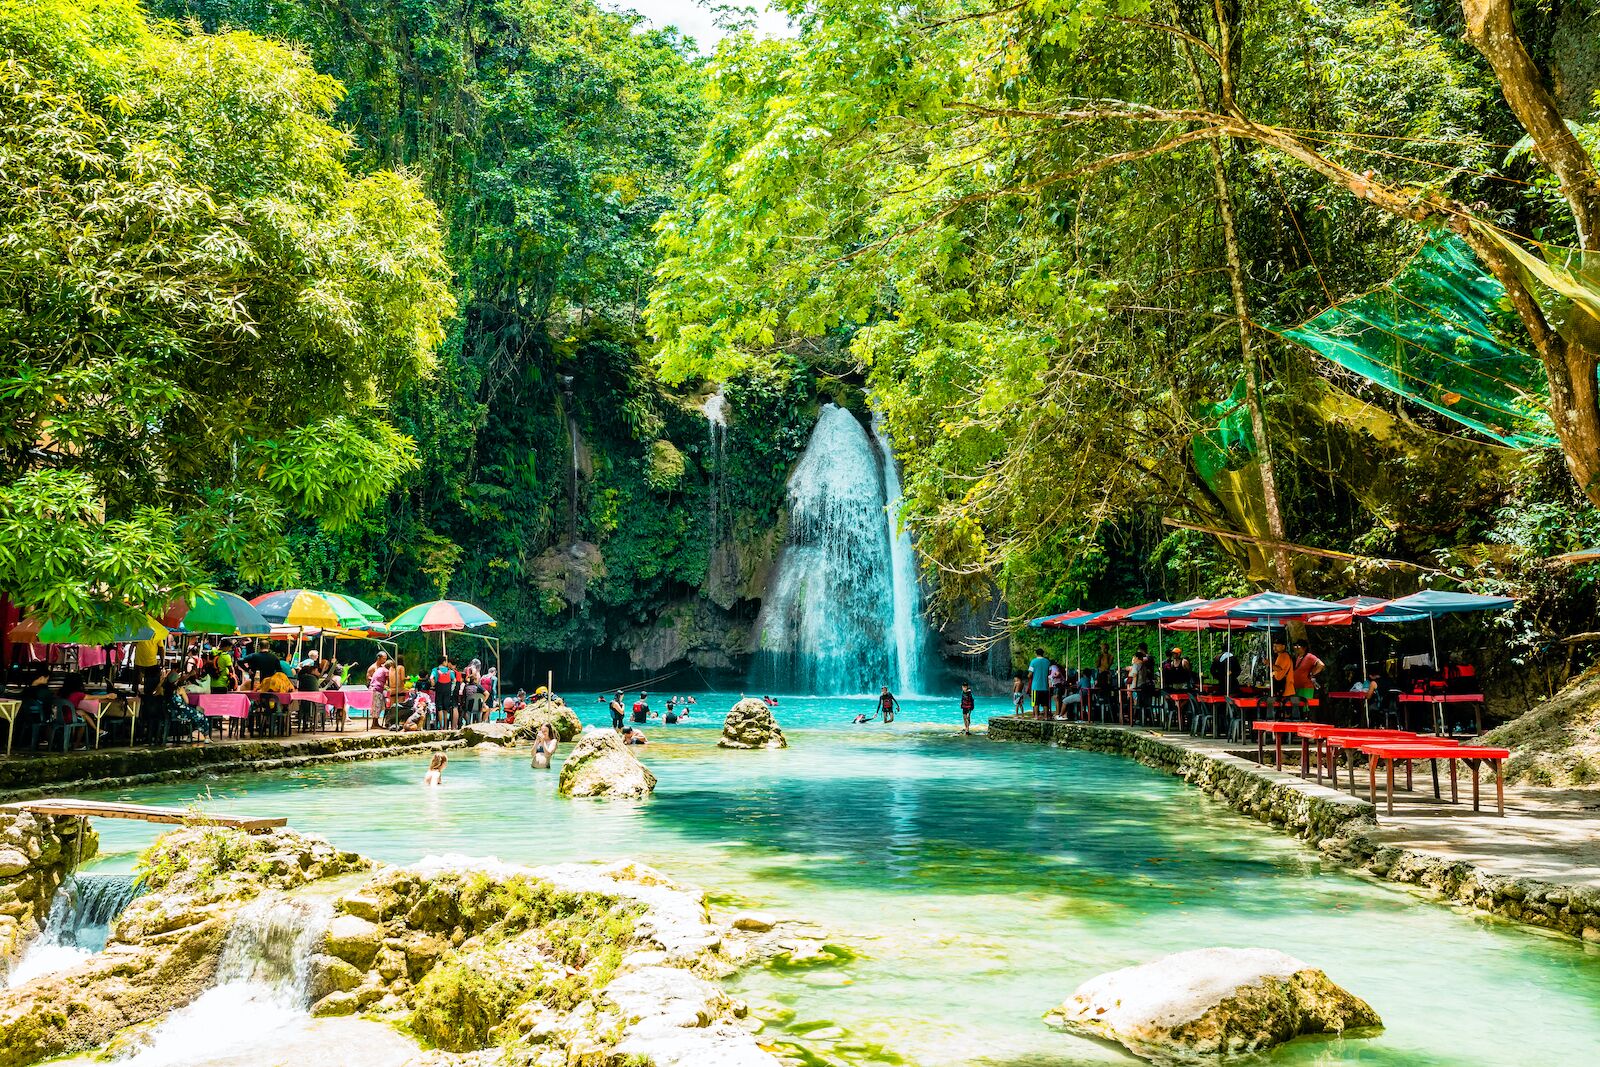 Mulit colored umbrellas and red benches at Kawasan Falls, where people are eating and swimming